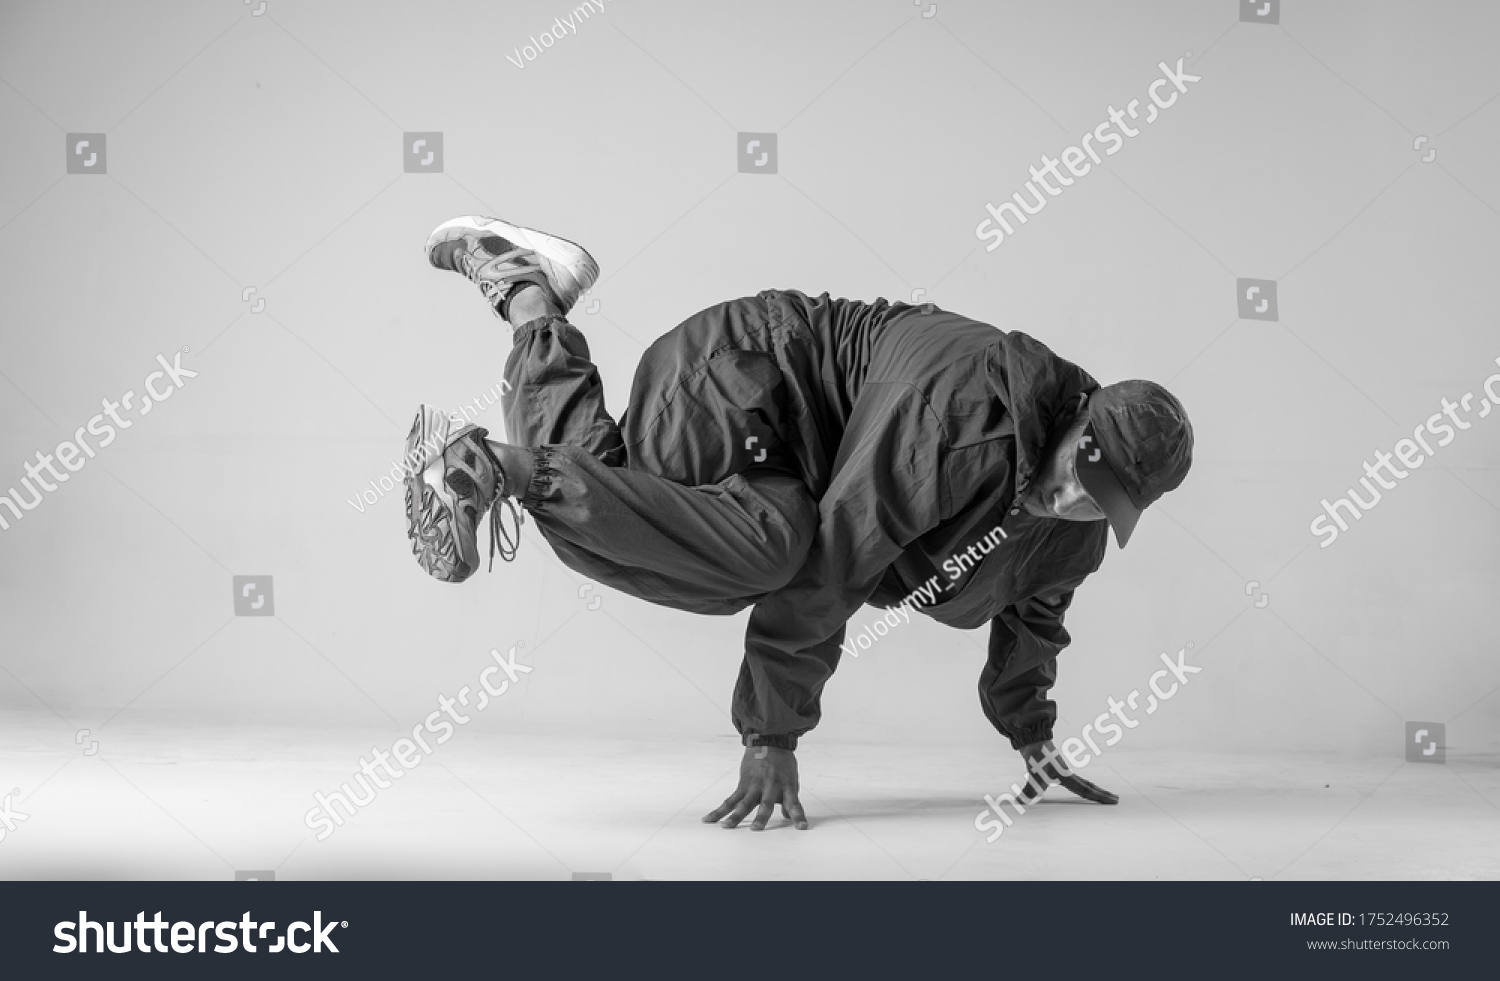 A man hip hop dancer or bboy freezes in one pose on a white background. Bboy doing stylish stunts. #1752496352